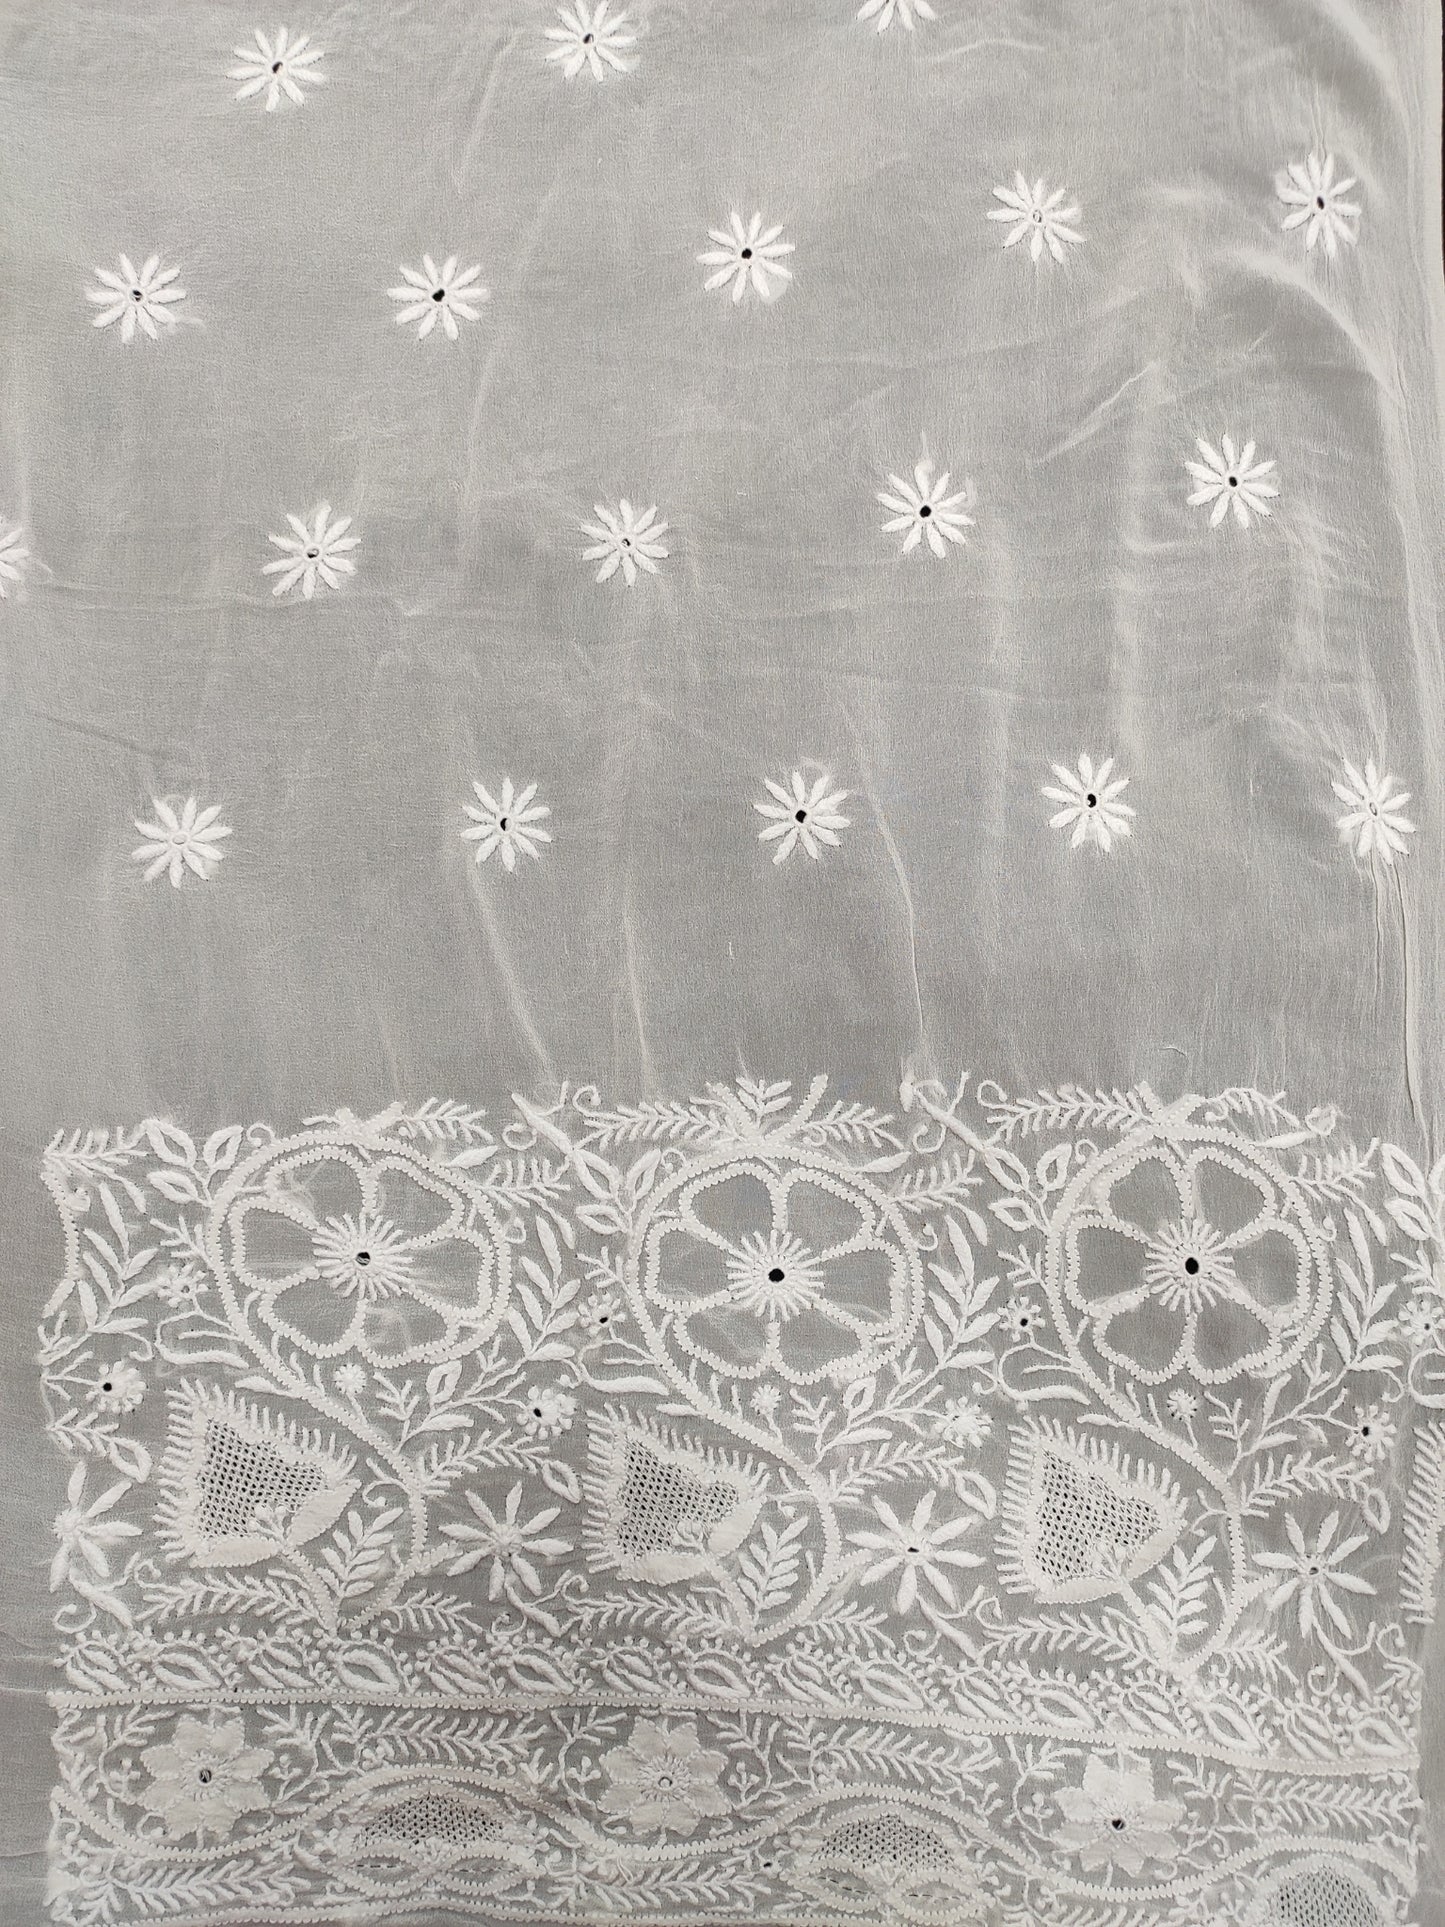 Shyamal Chikan Hand Embroidered White Pure Georgette Lucknowi Chikankari Saree With Blouse Piece  - S21025